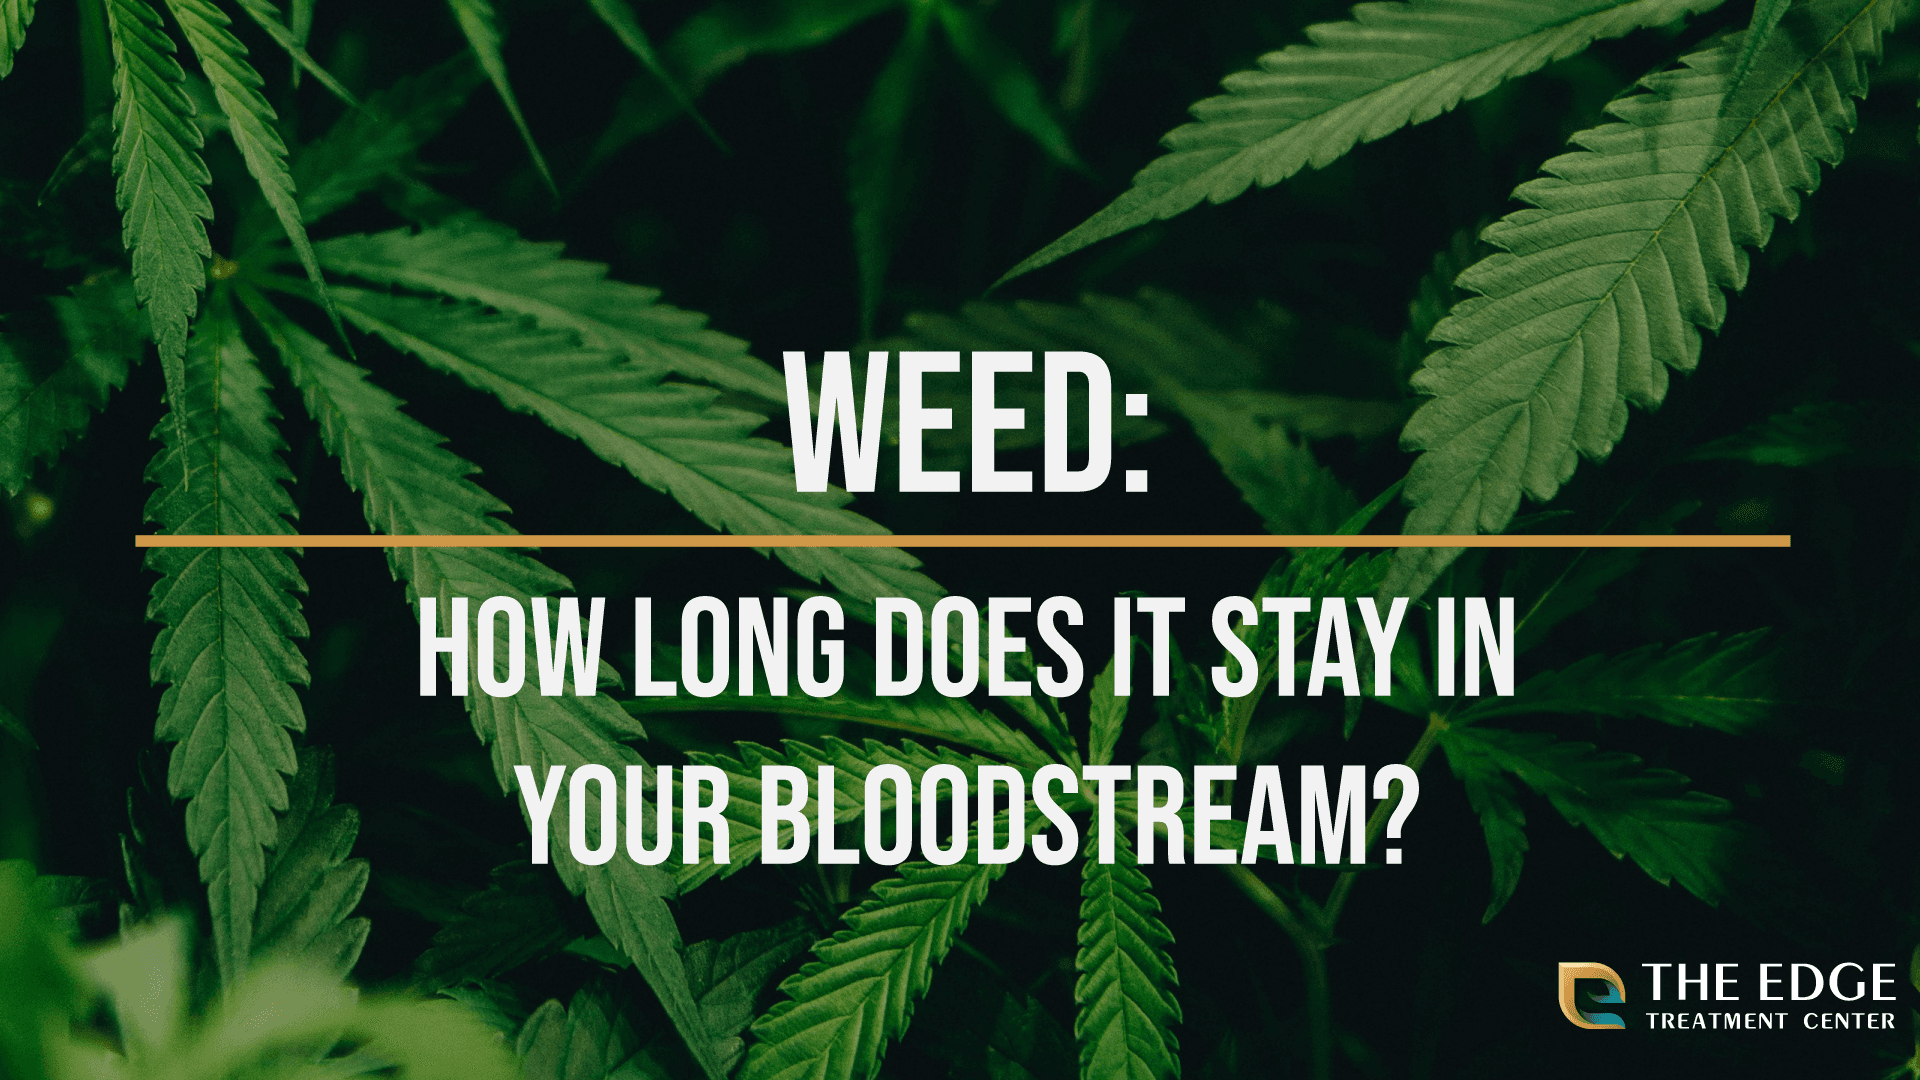 How Long Does Weed Stay in Your Bloodstream?